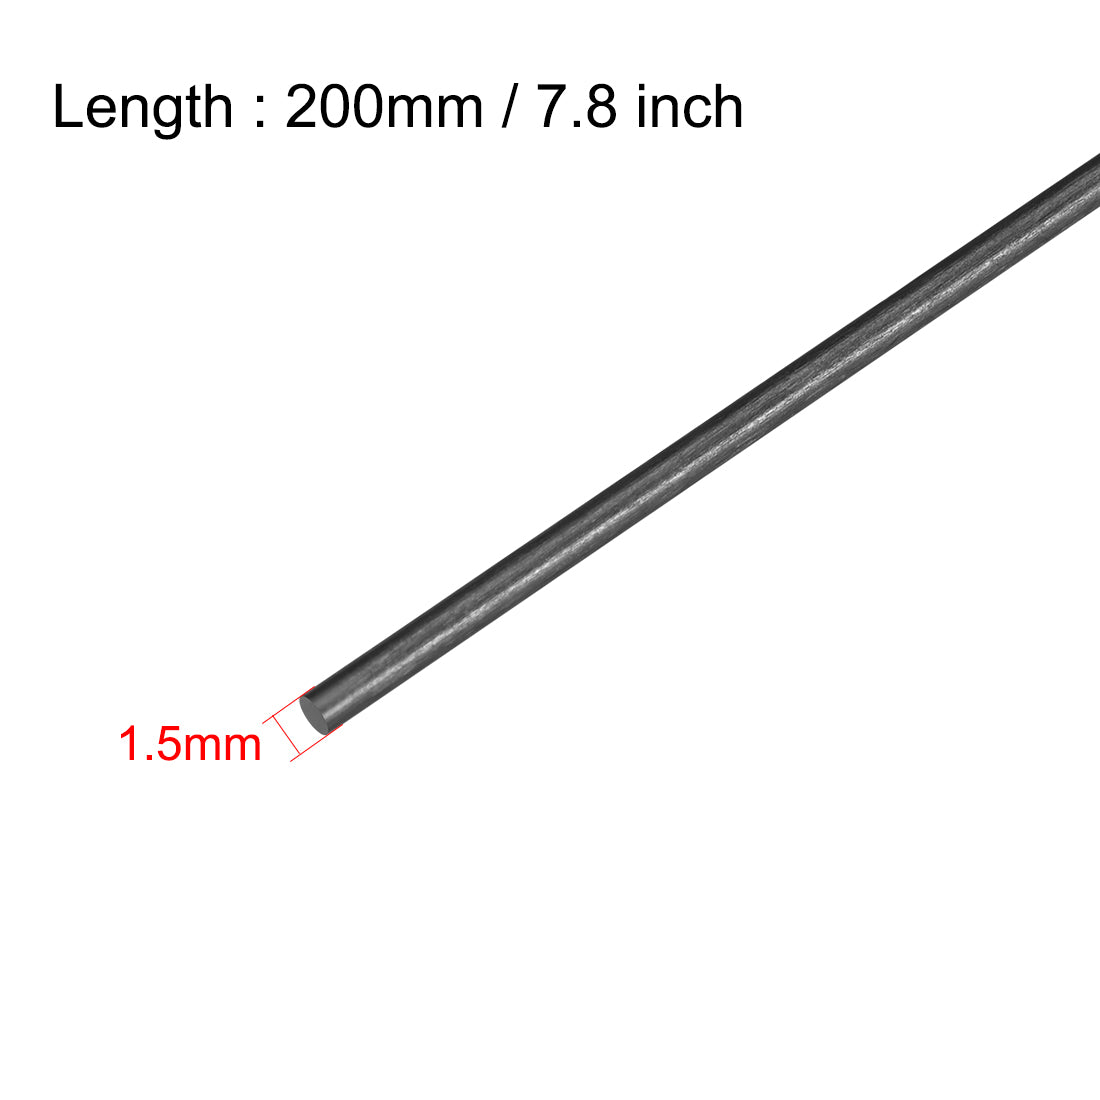 Uxcell Uxcell 4mm Carbon Fiber Rod For RC Airplane Matte Pole US, 200mm 7.8 inch, 5pcs